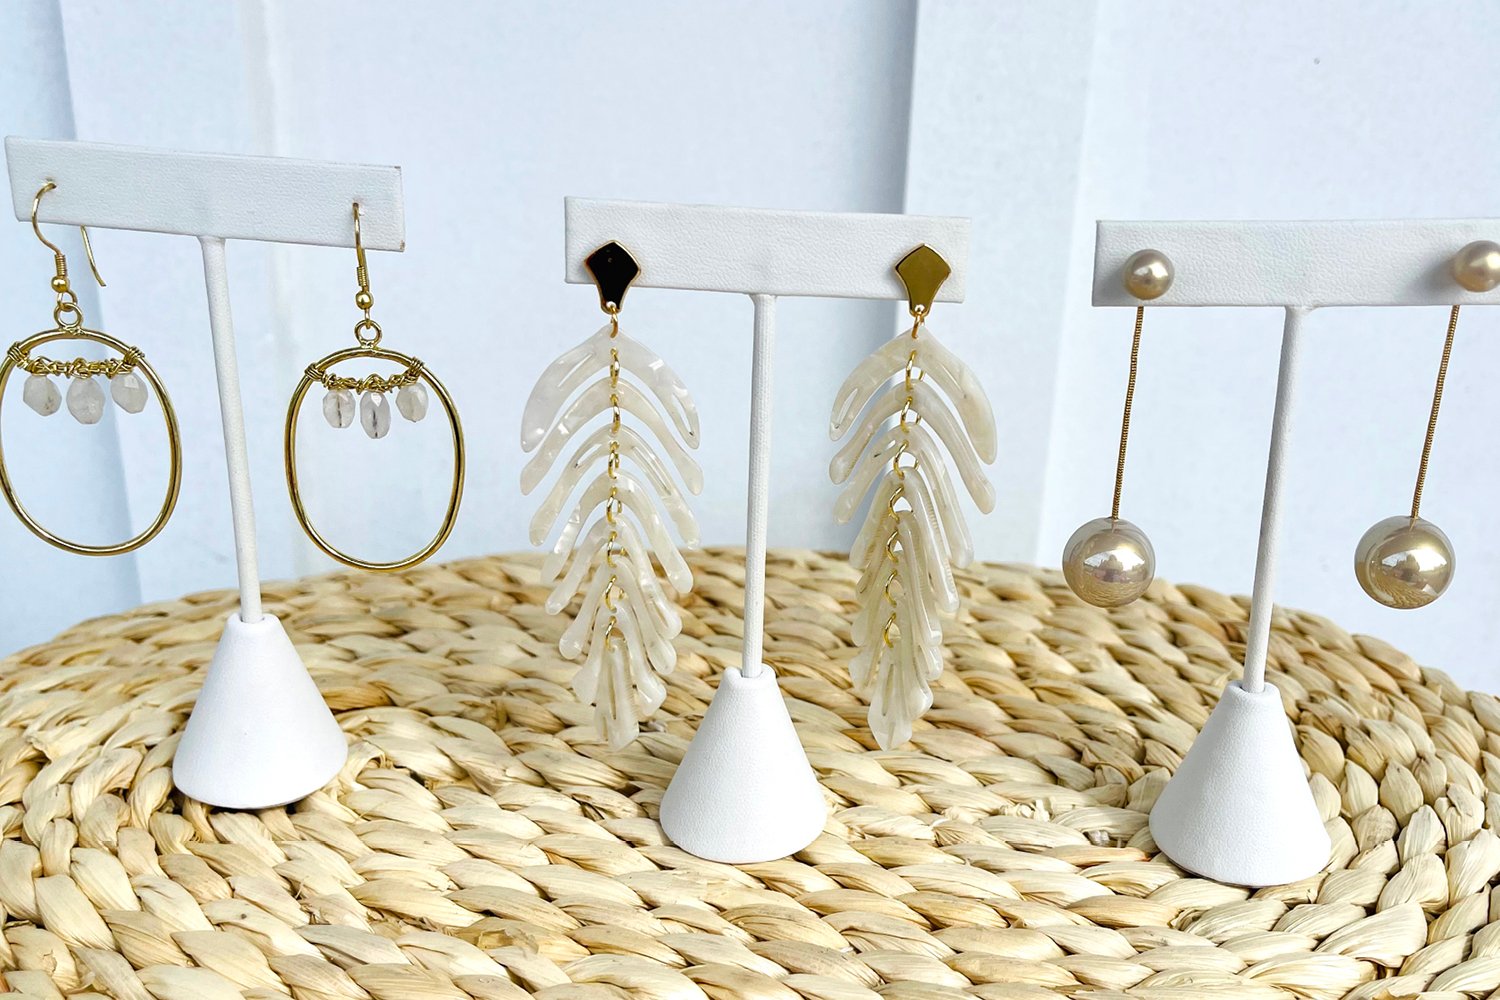 Dangle Earrings, Jewelry and Accessories at Bailey Island Mercantile